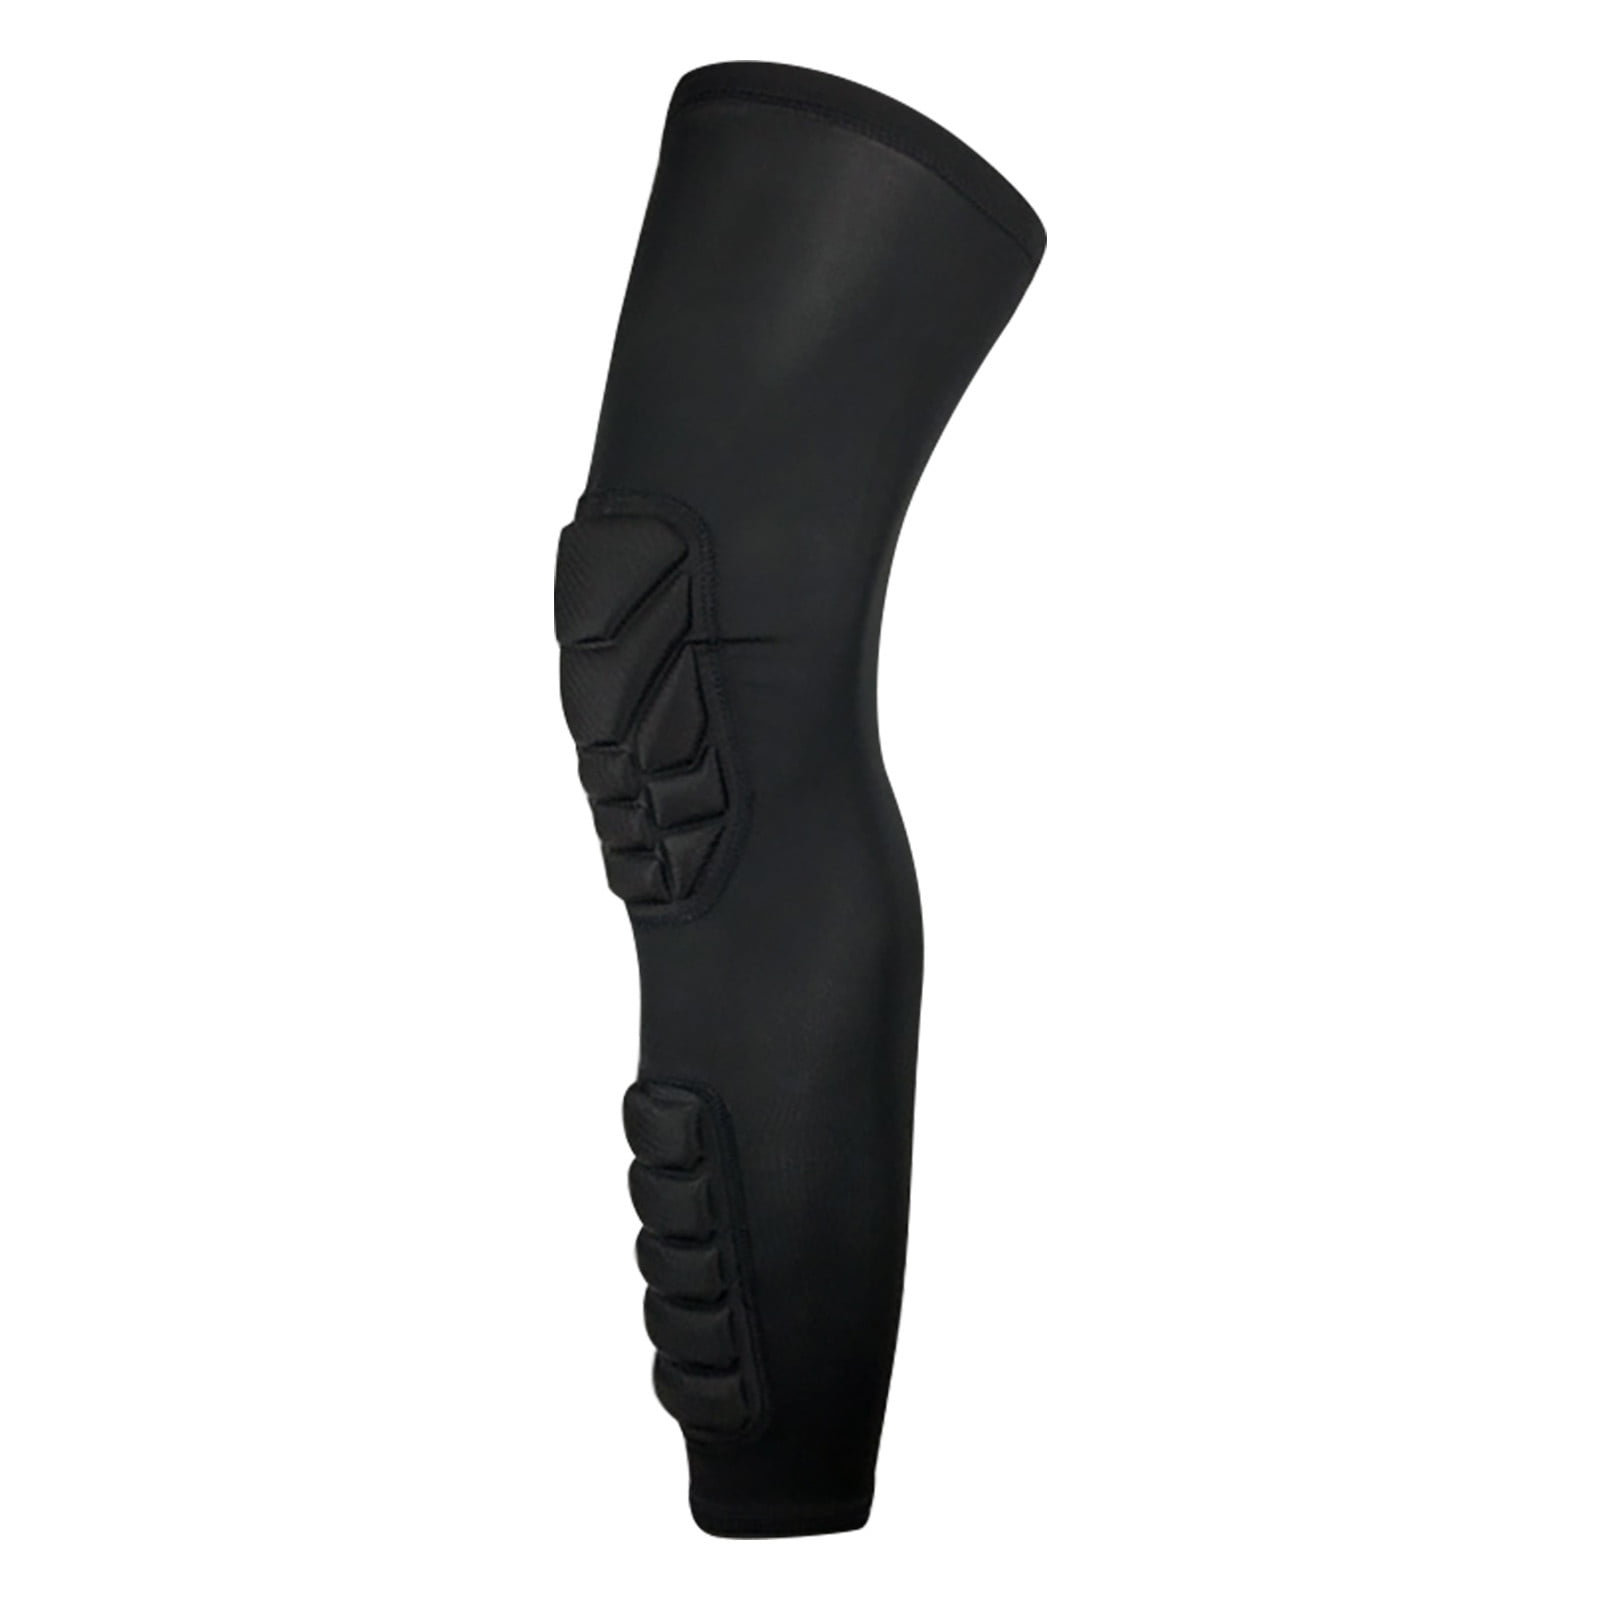 Kids Compression Leg Sleeves -Slip Leg Sleeves with Protective Knee Pads  for Basketball Volleyball Skating